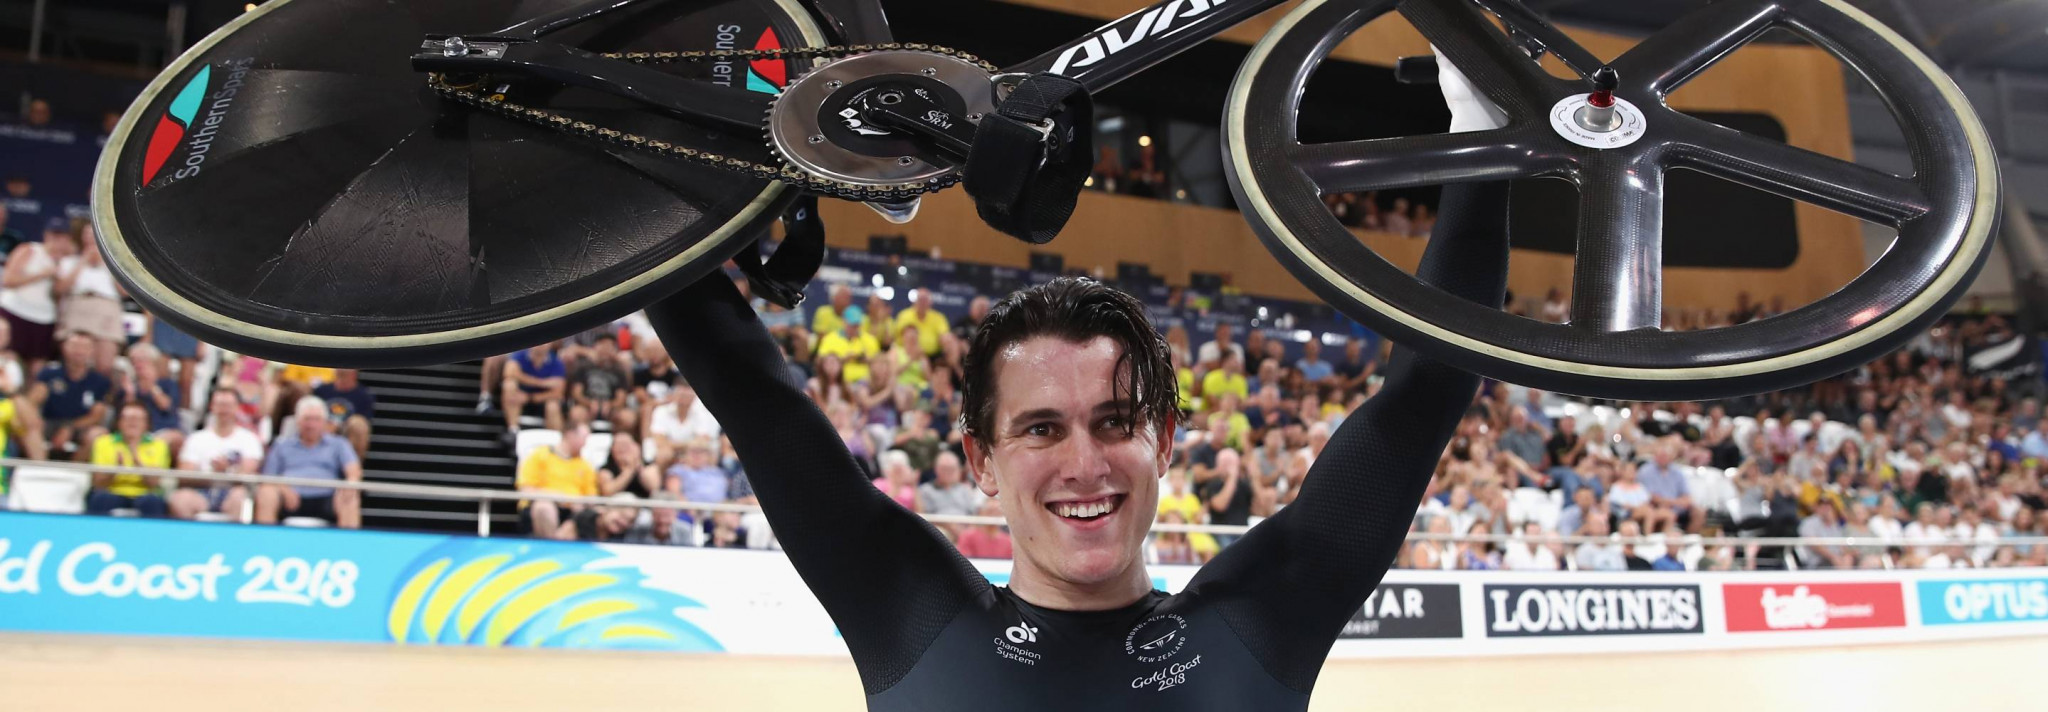 Four-time Commonwealth Games track cycling champion Webster retires aged 31